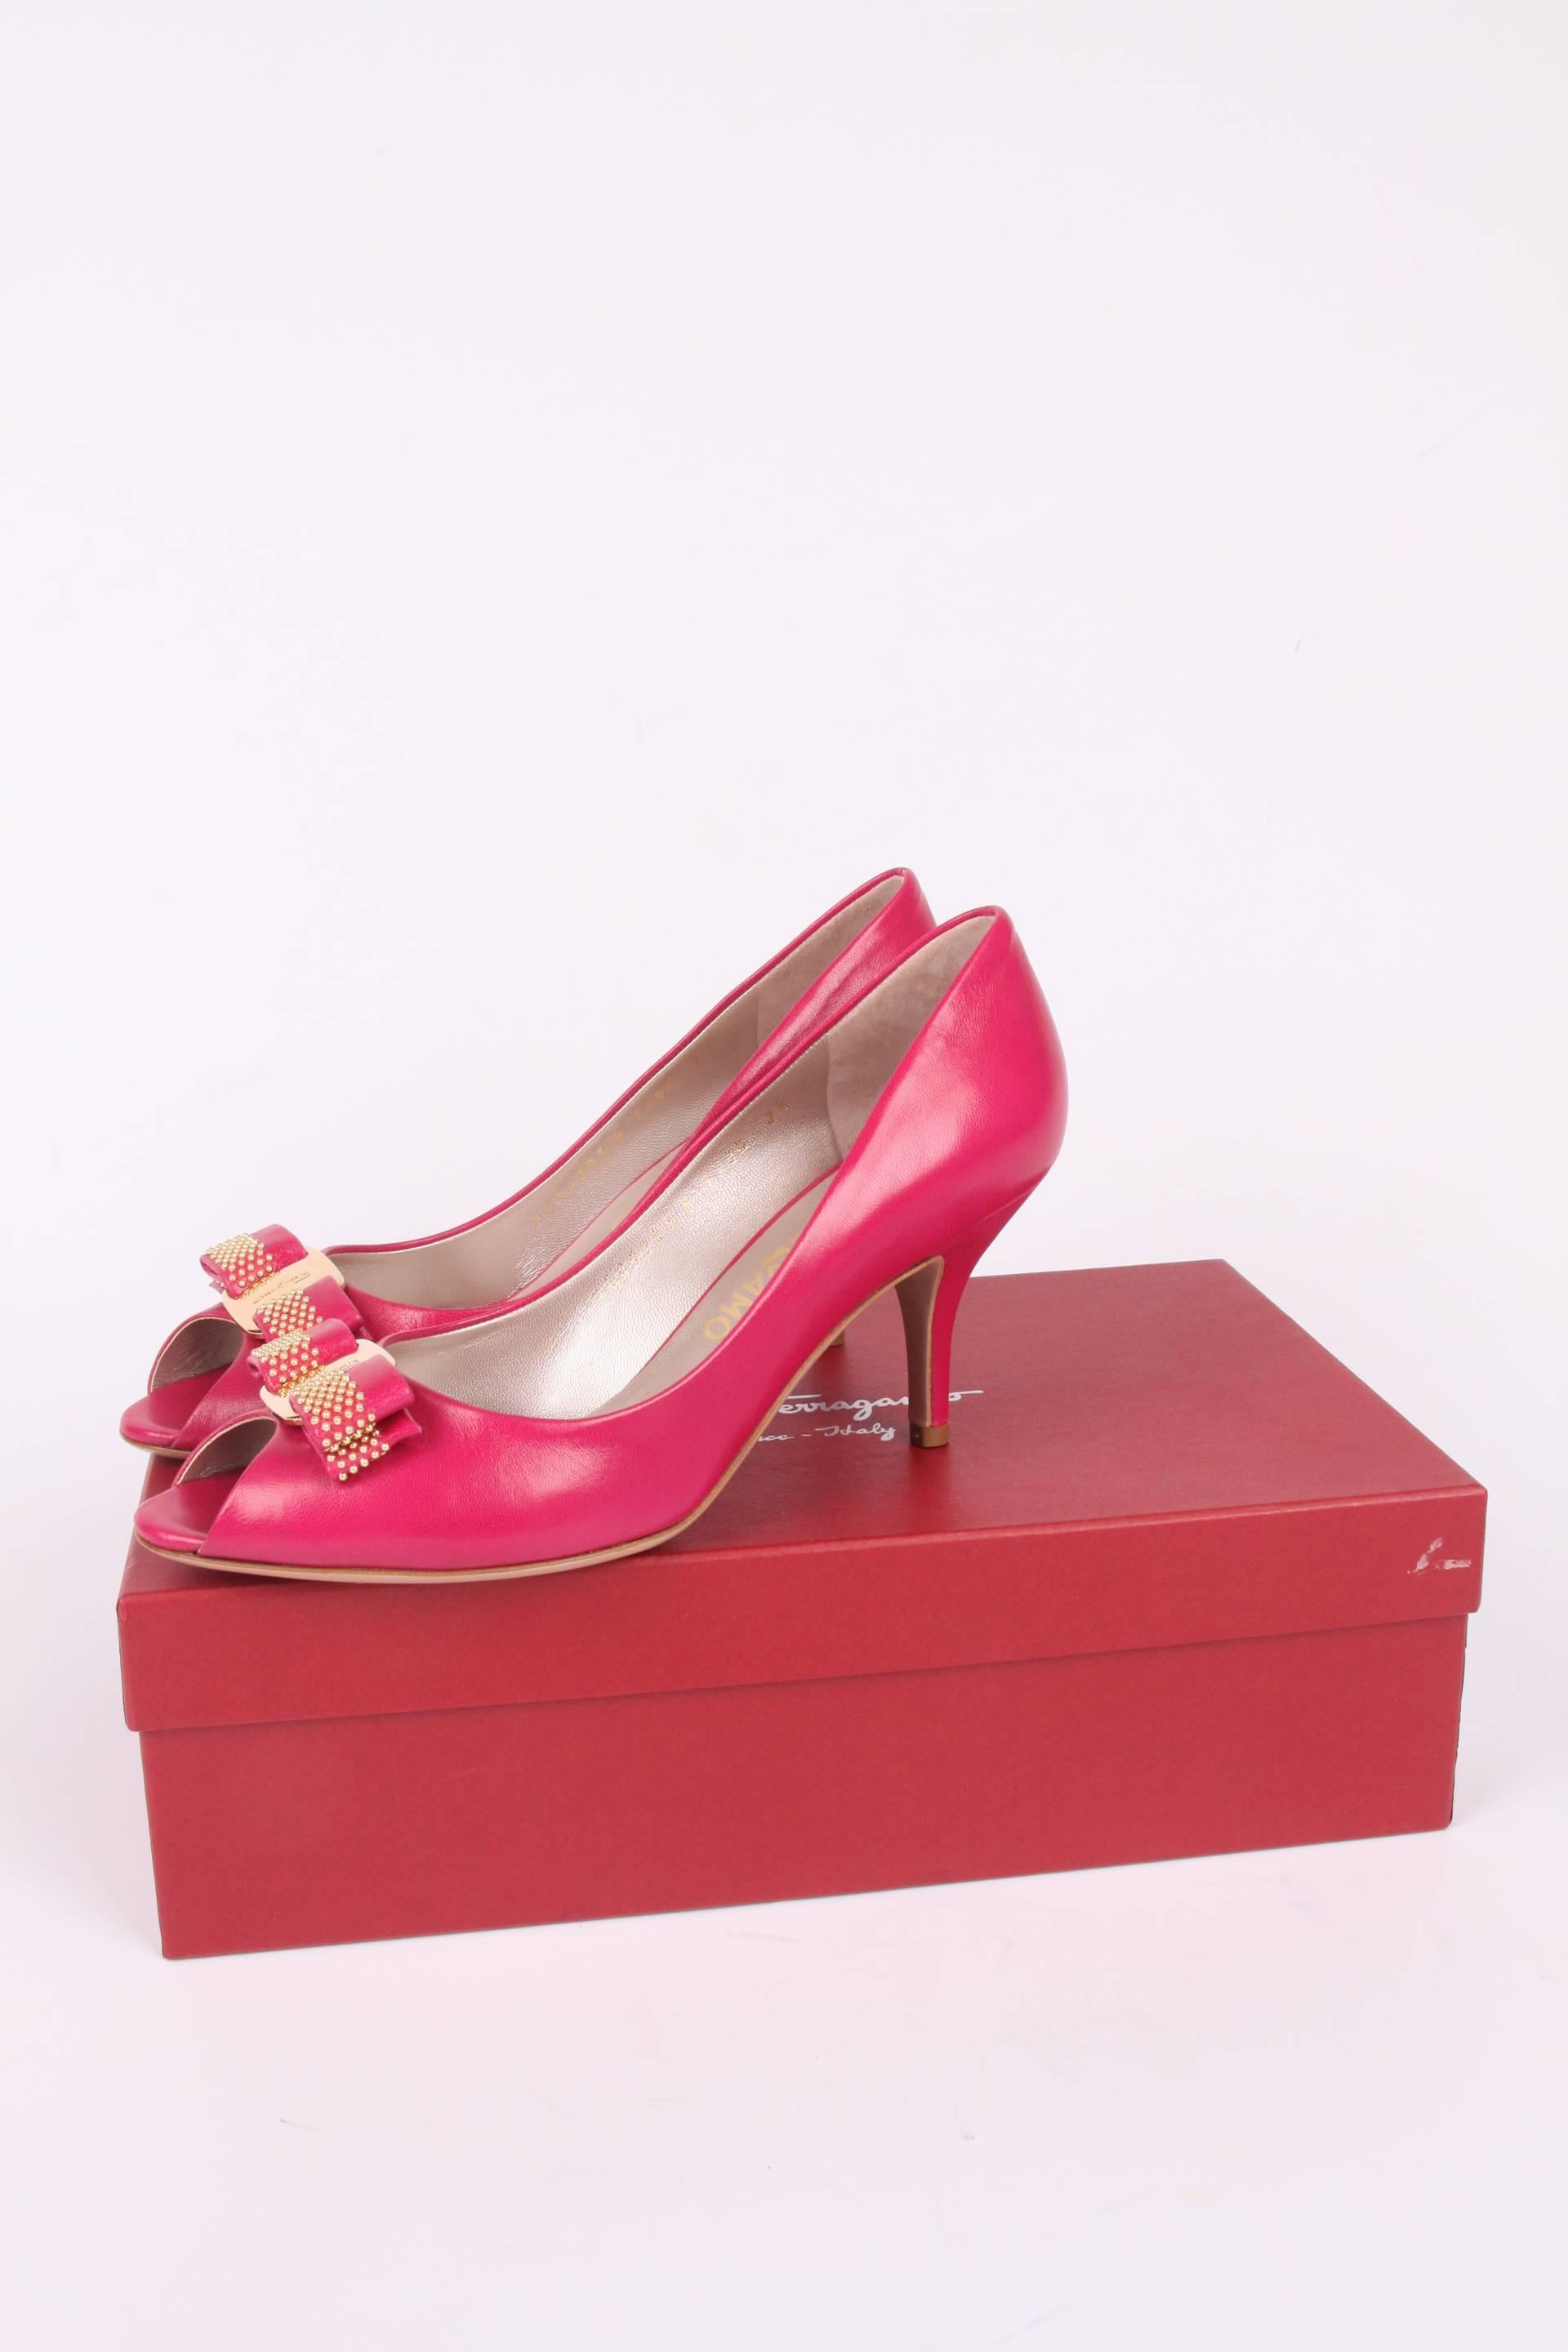 Cheerful pumps by Salvatore Ferragamo crafted in shocking pink leather.  

A peep-toe with a bow and a shiny gold-tone metal plaque with embossing of a Ferragamo logo. Leather outsole and a heel that measures 8 centimeters. Leather insole. 

New and